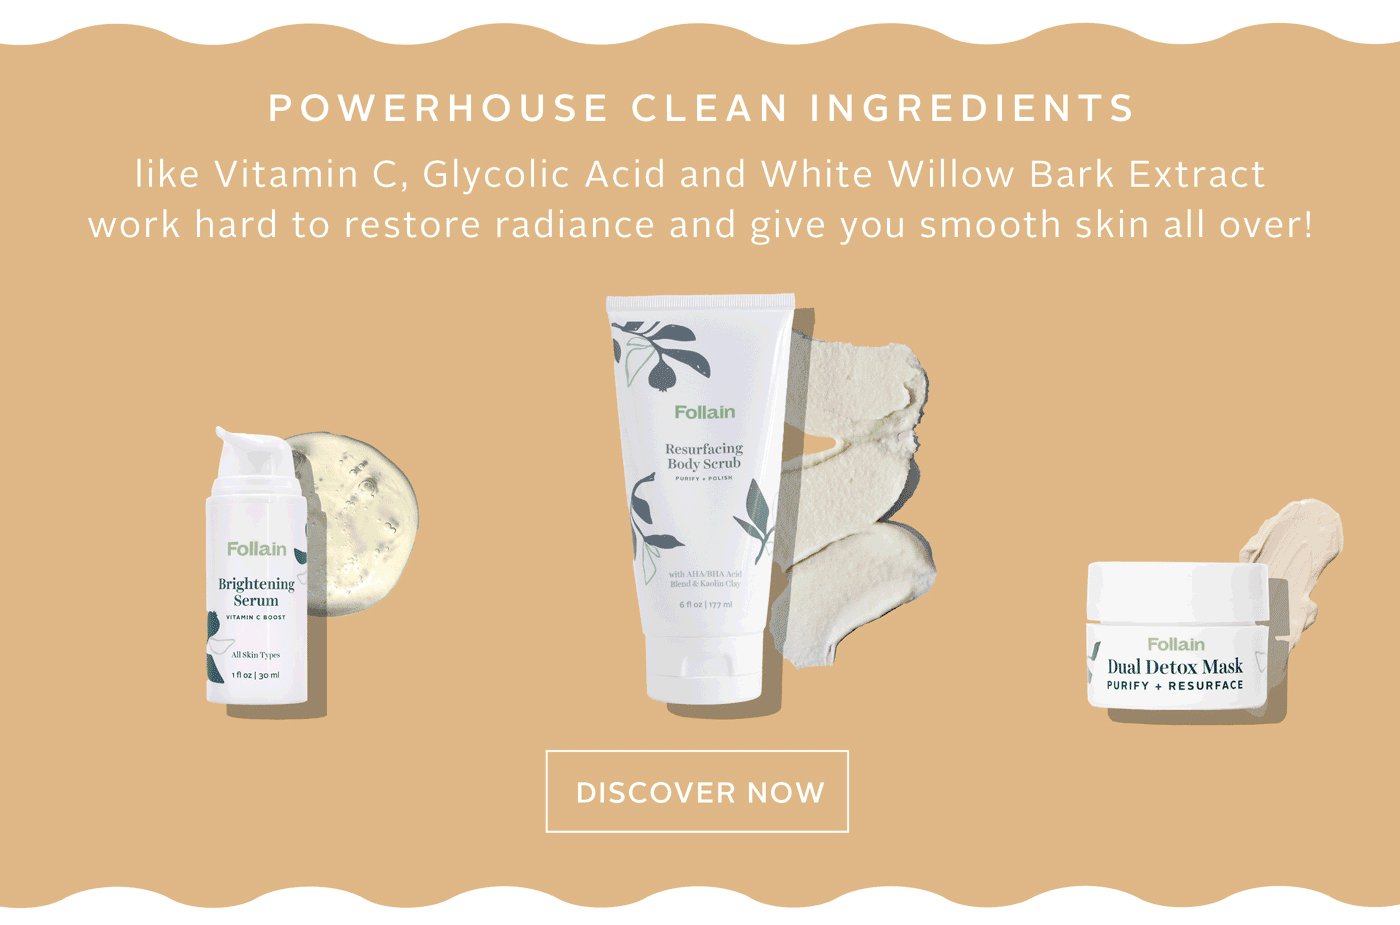 Powerhouse clean ingredients like Vitamin C, Glycolic Acid and White Willow Bark Extract work hard to restore radiance and give you smooth skin all over!